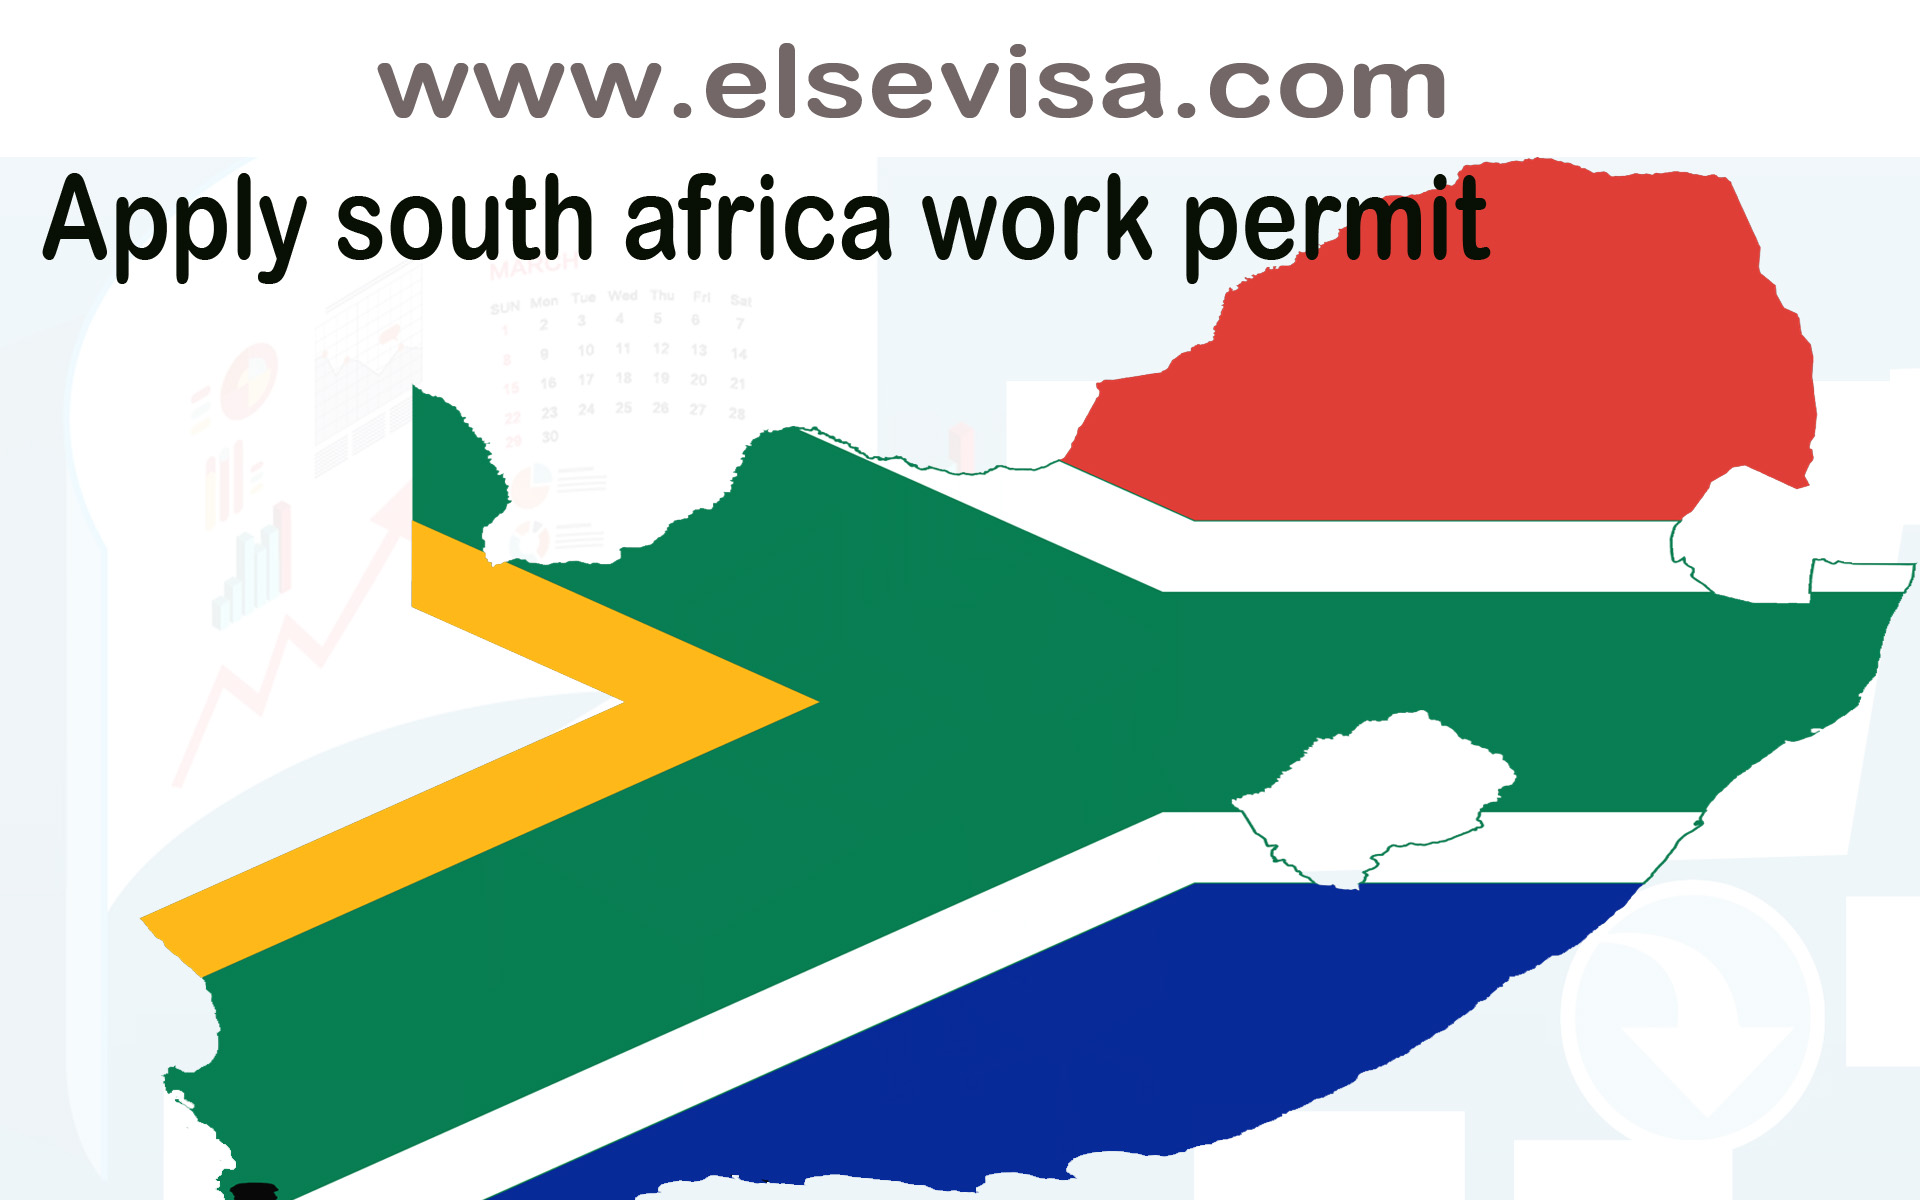 Reasons for apply south africa work permit